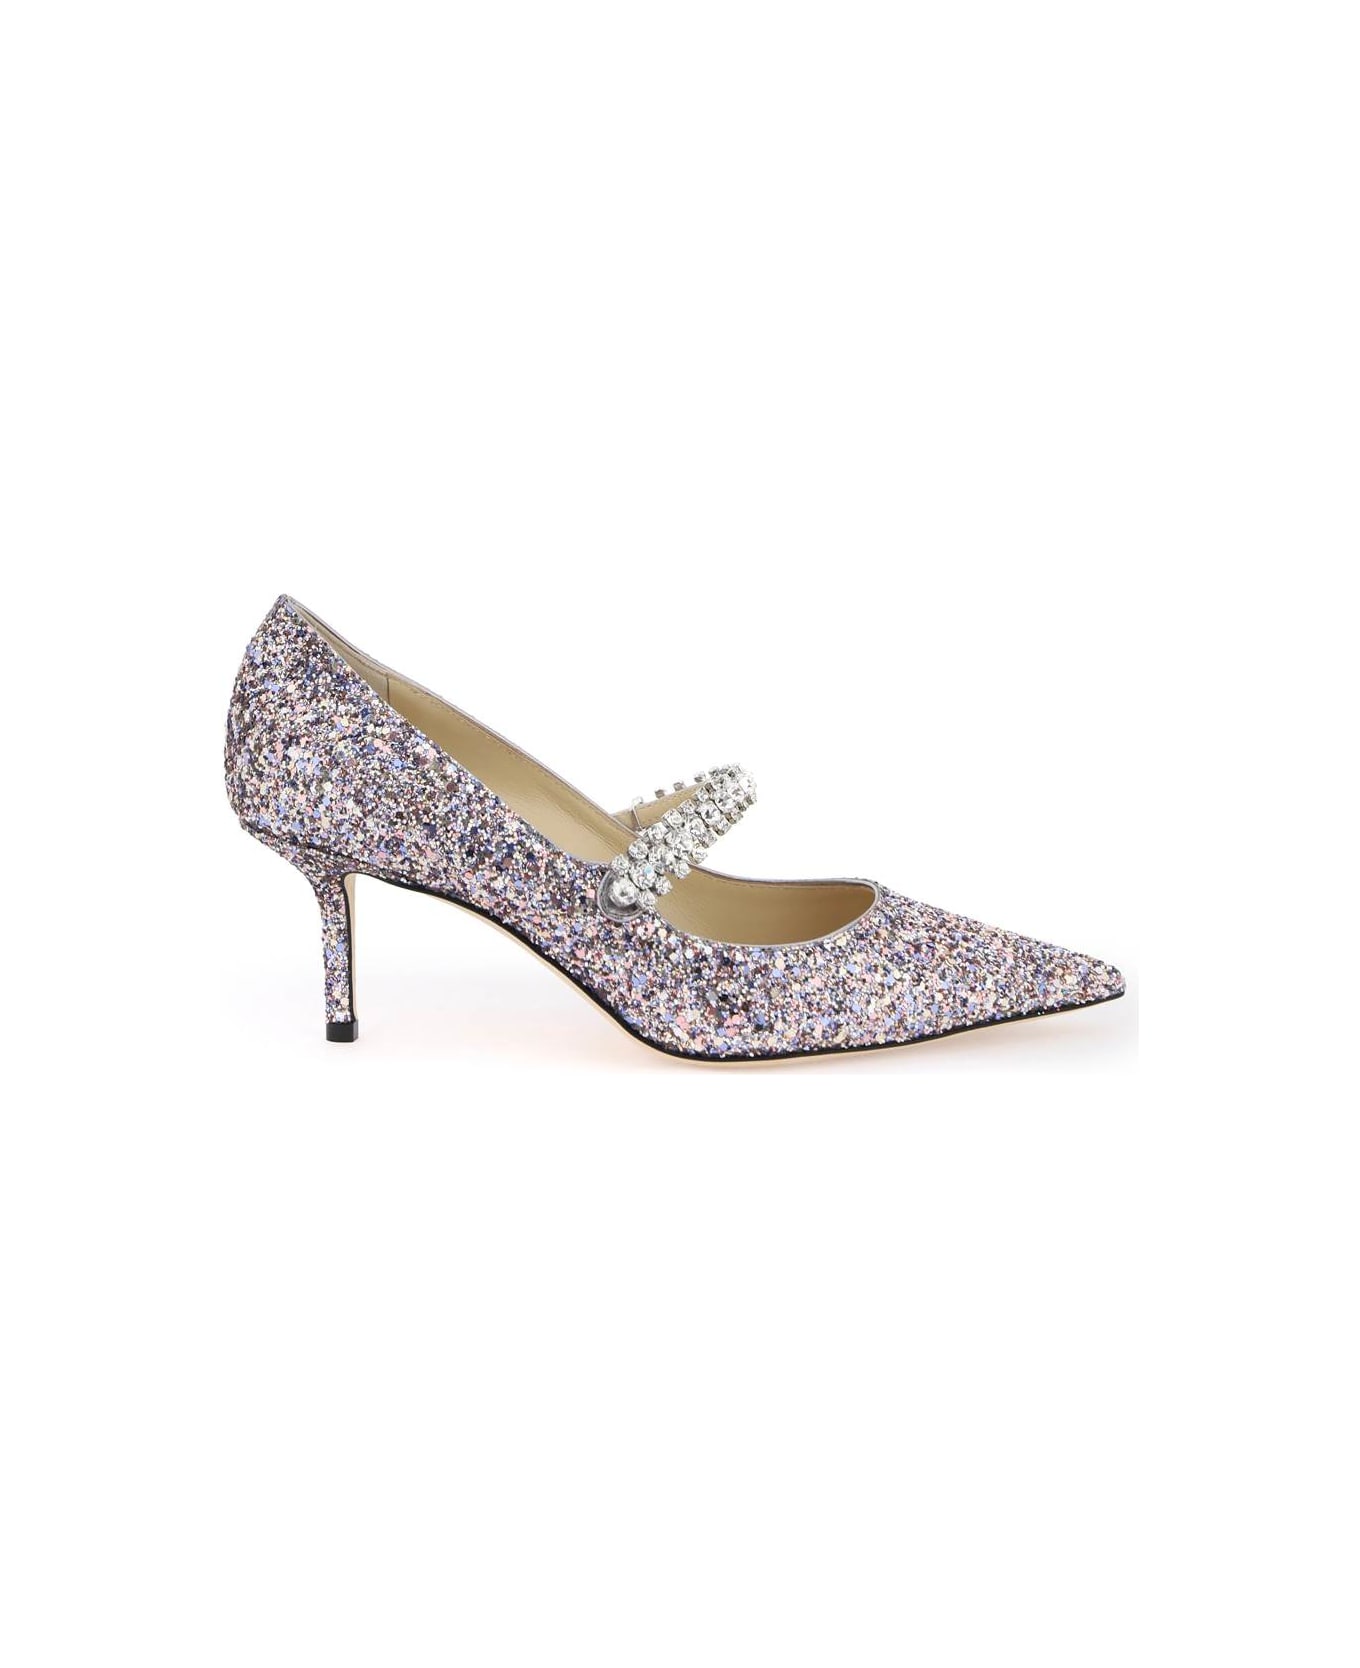 Jimmy Choo Bing 65 Pumps With Glitter And Crystals - SPRINKLE MIX (Pink)